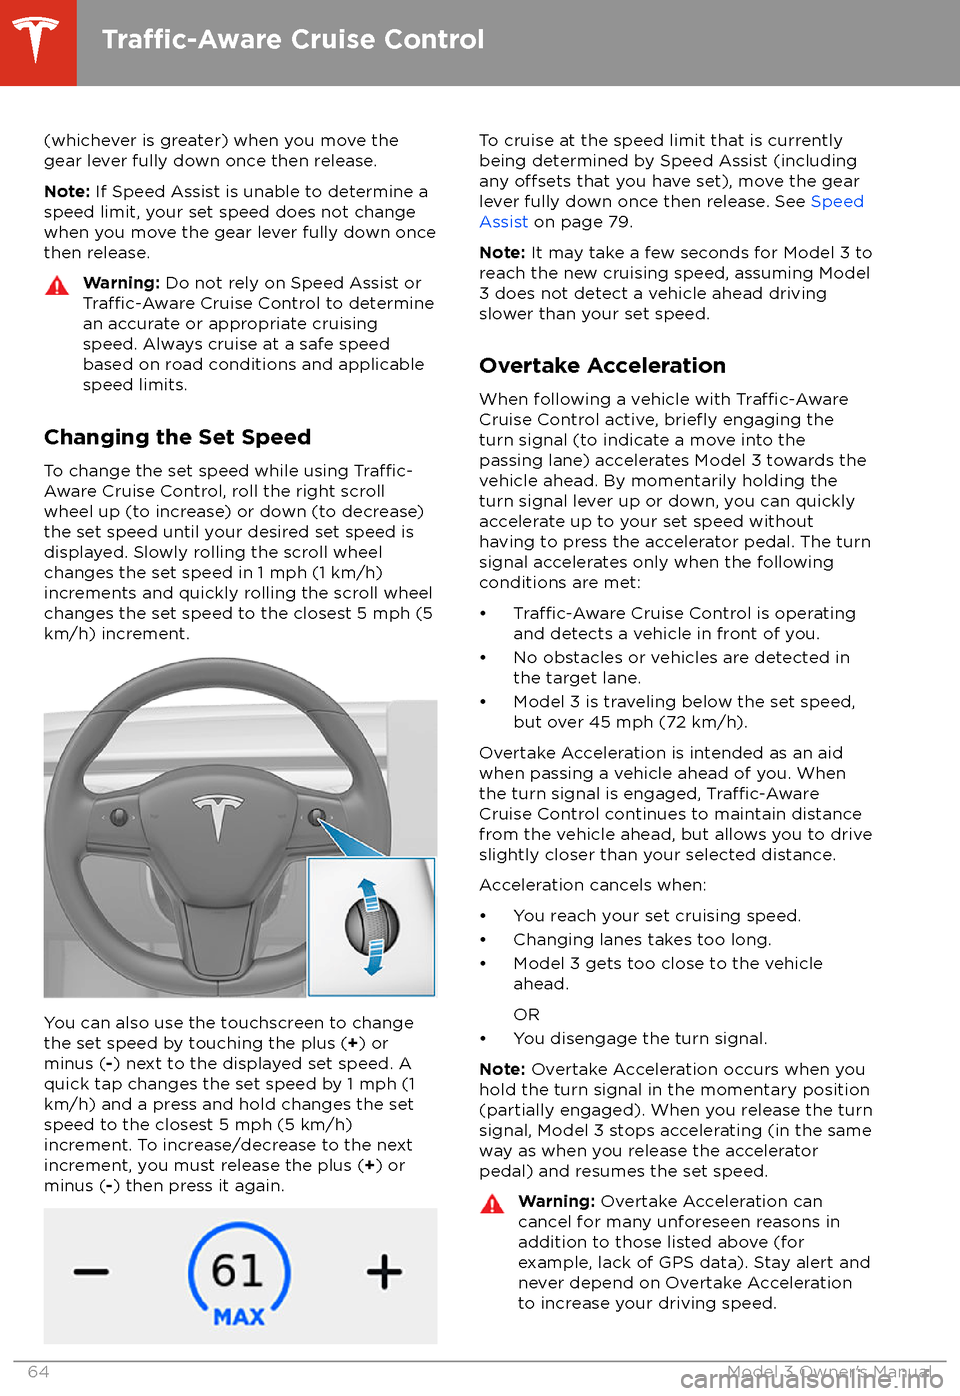 TESLA MODEL 3 2018  Owners Manual (whichever is greater) when you move the
gear lever fully down once then release.
Note:  If Speed Assist is unable to determine a
speed limit, your set speed does not change
when you move the gear lev